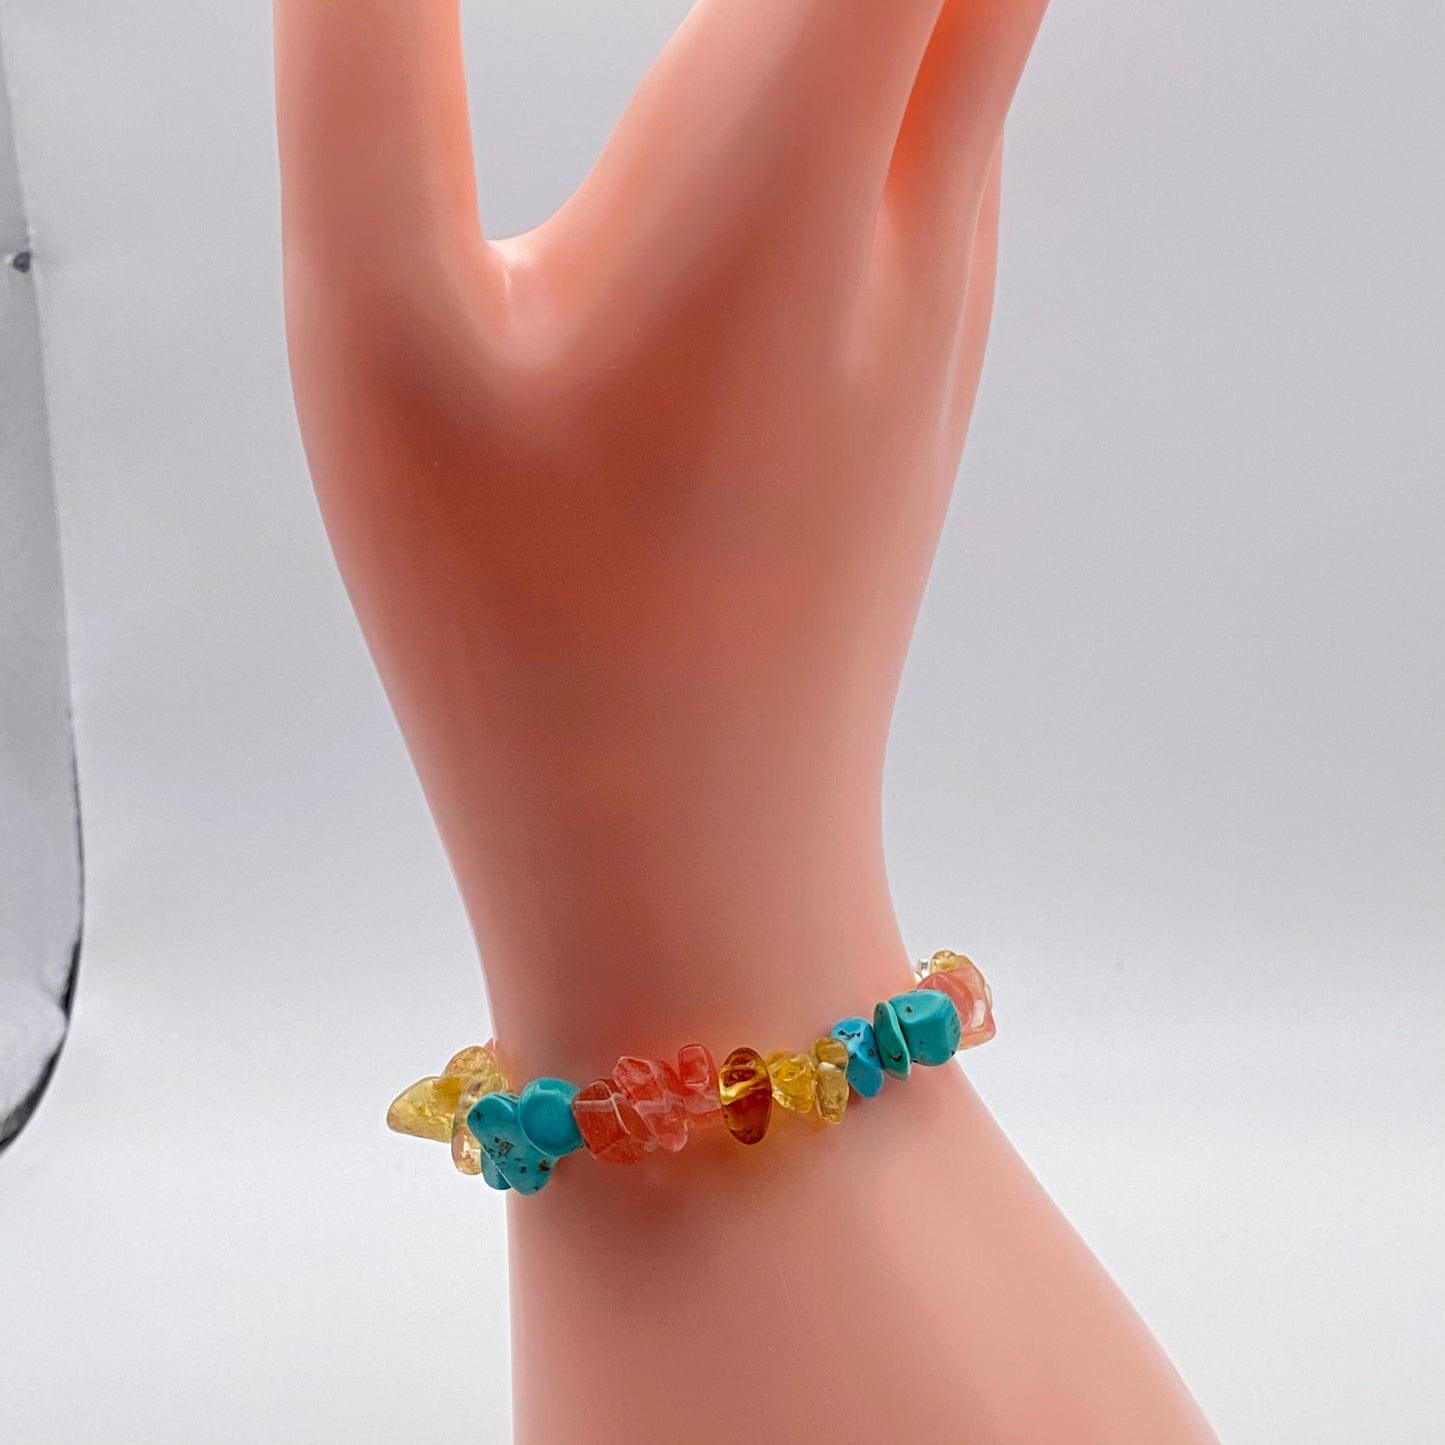 Pink, Yellow and Blue Crystal Bracelet